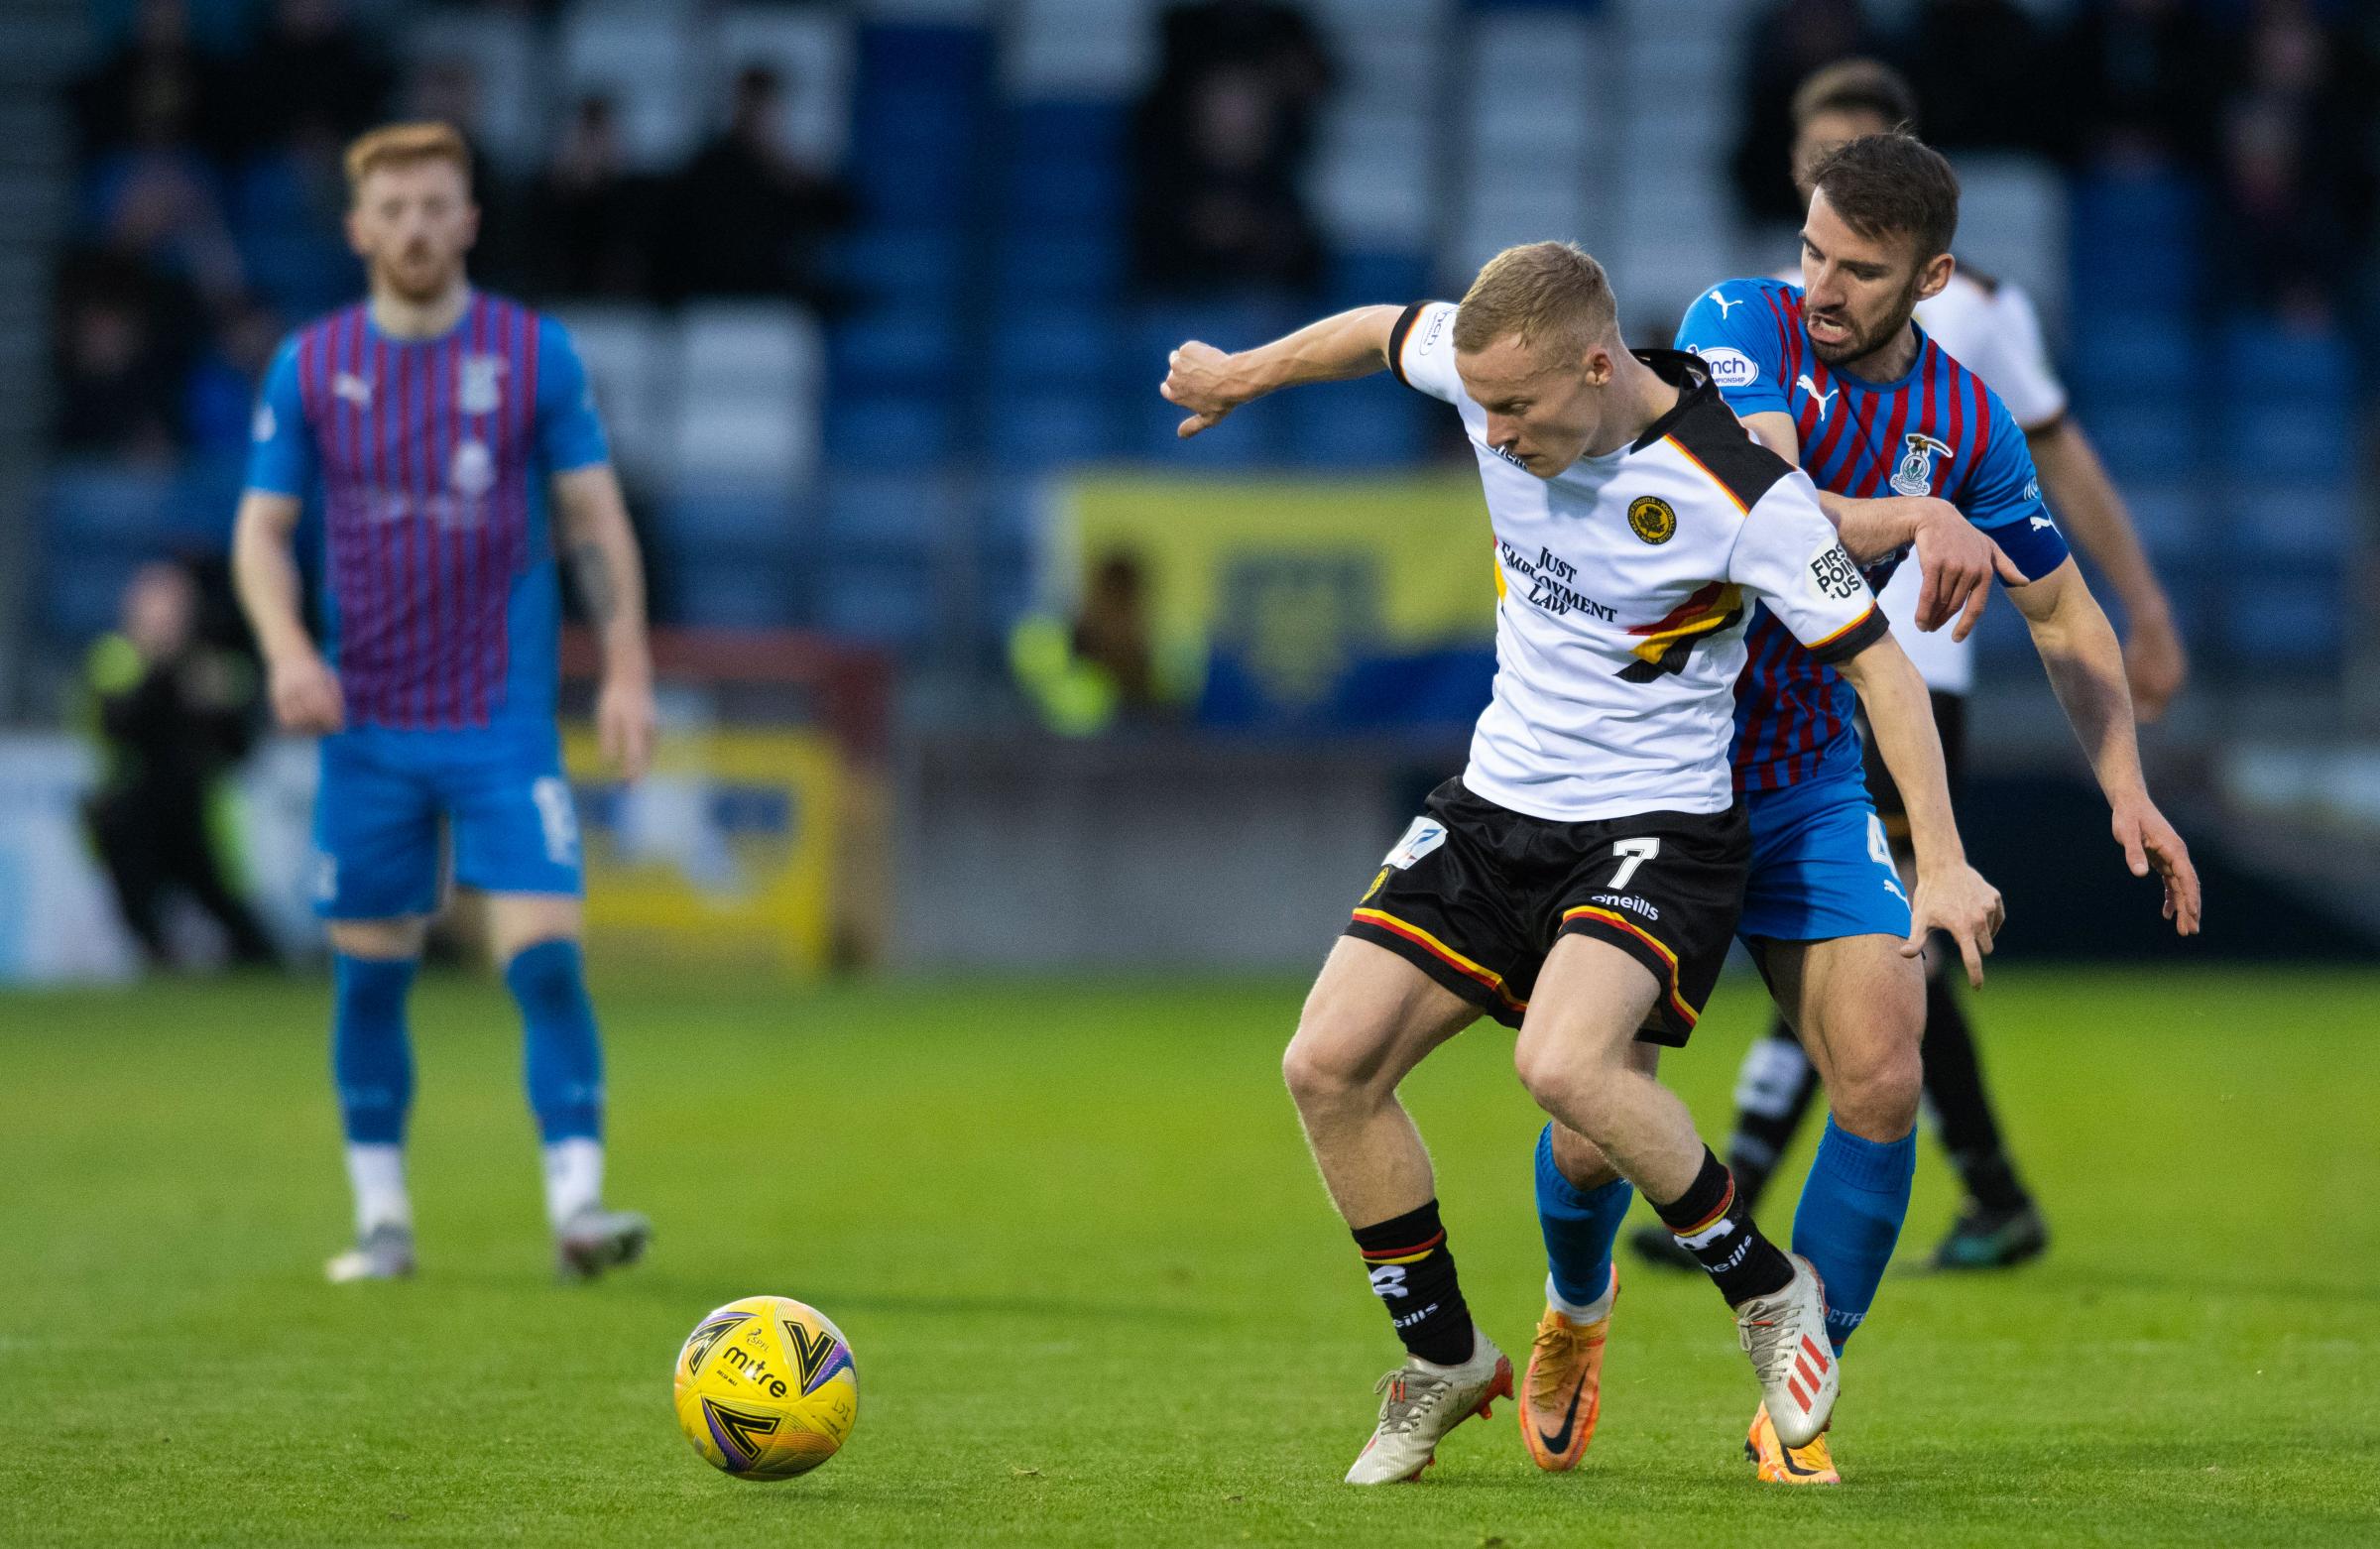 No offers yet for Scott Tiffoney as Ian McCall names his price for winger